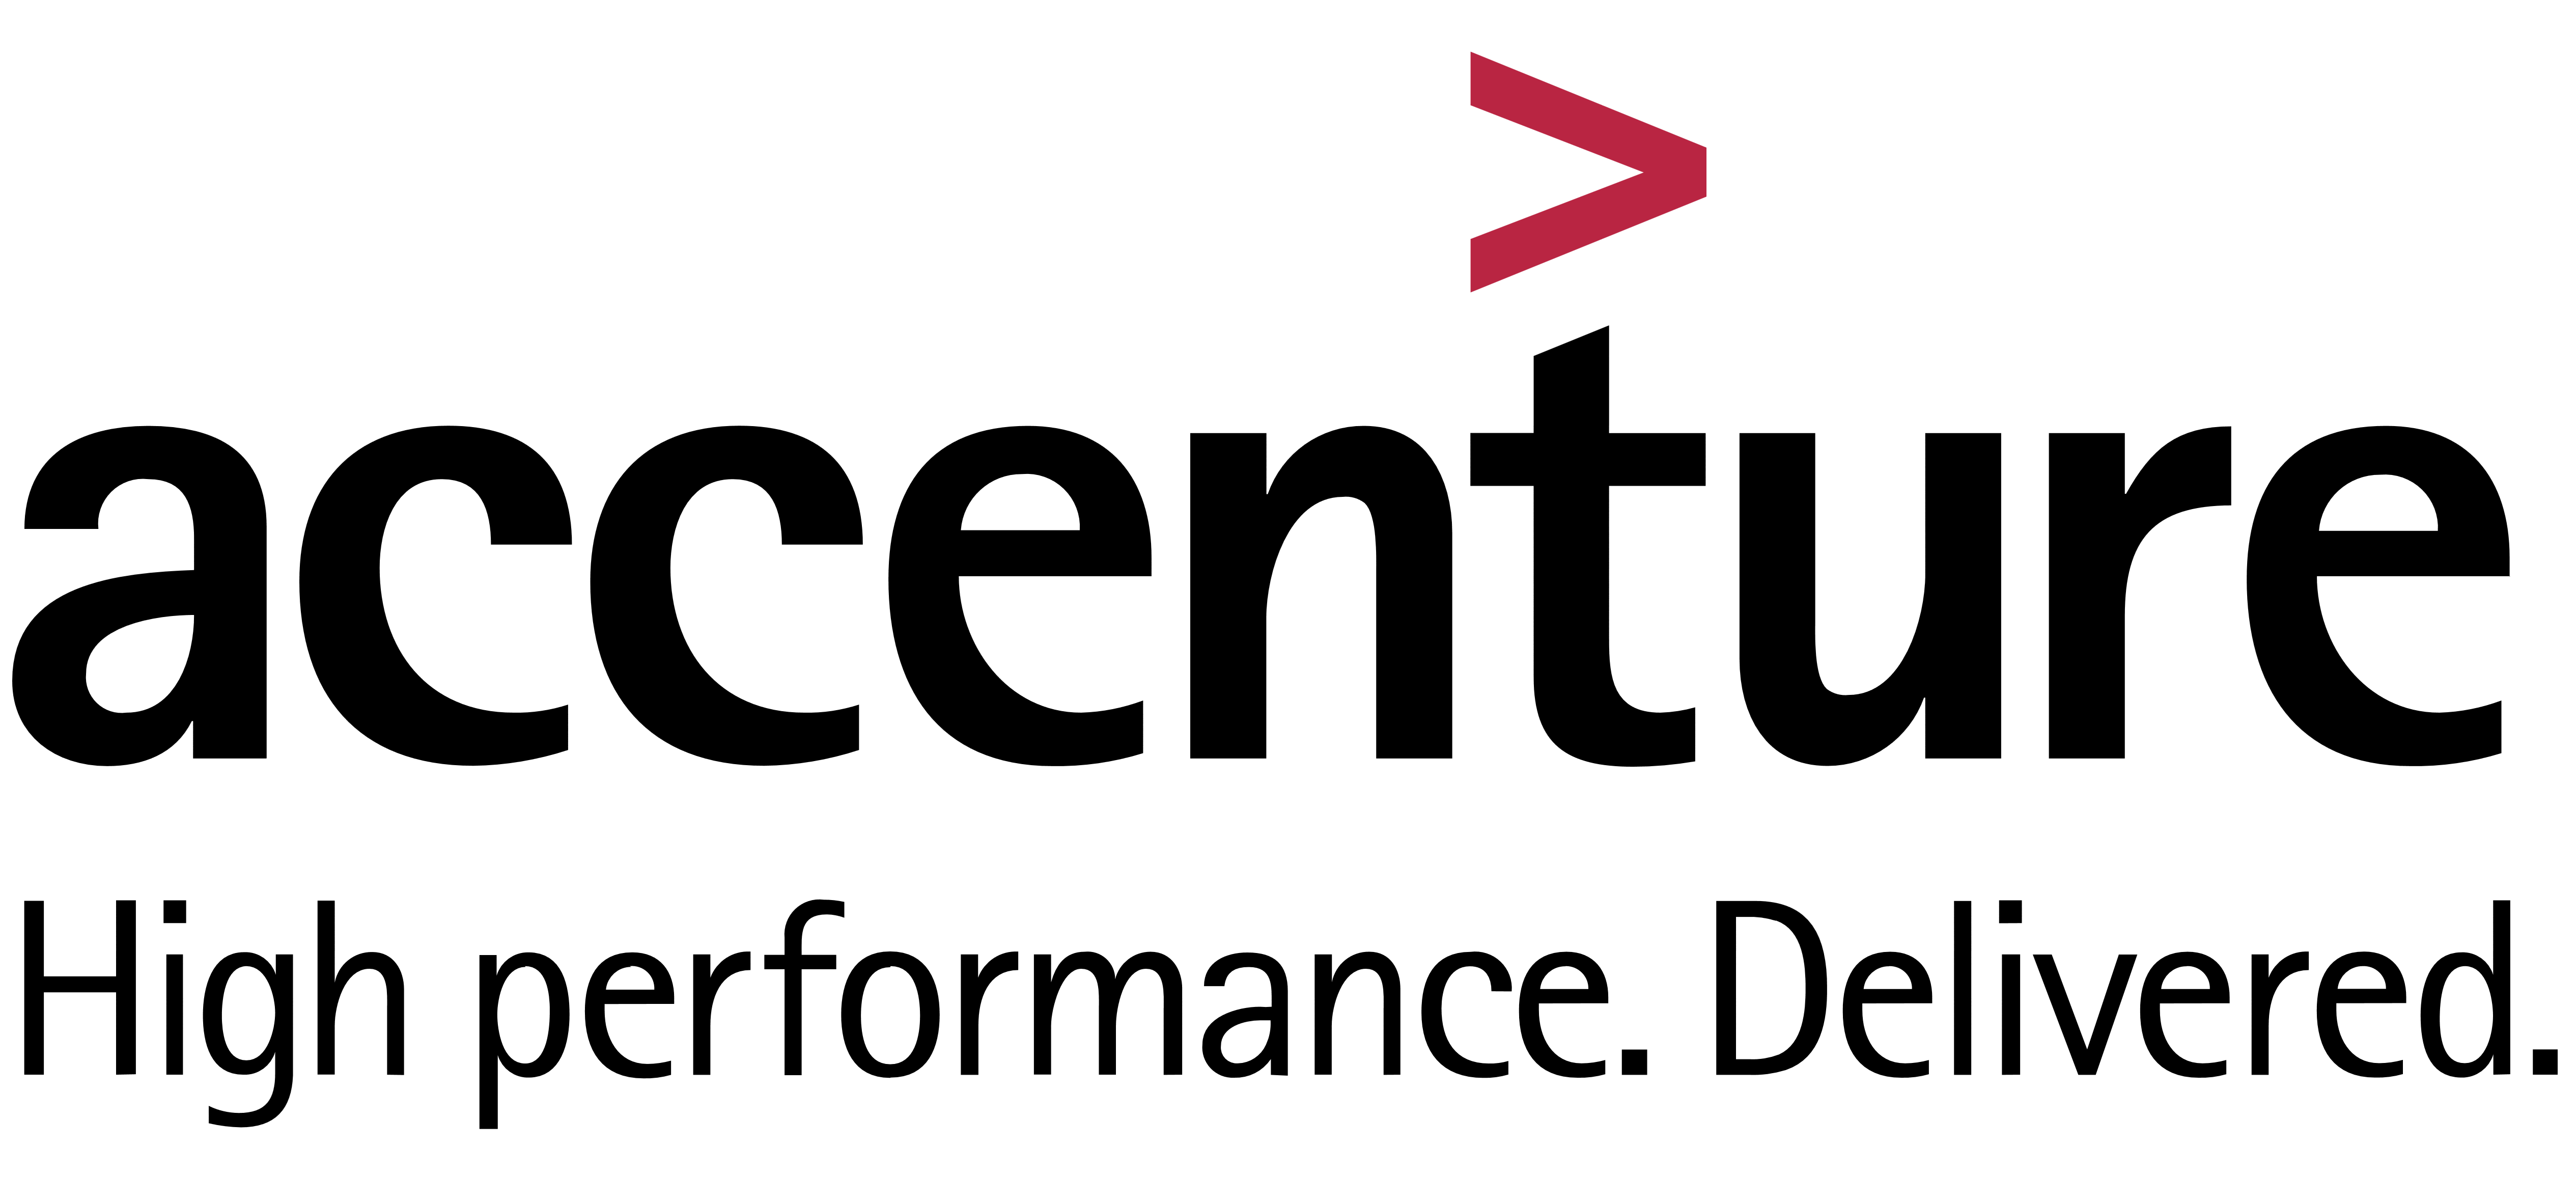 Awesome Person Logo - Accenture